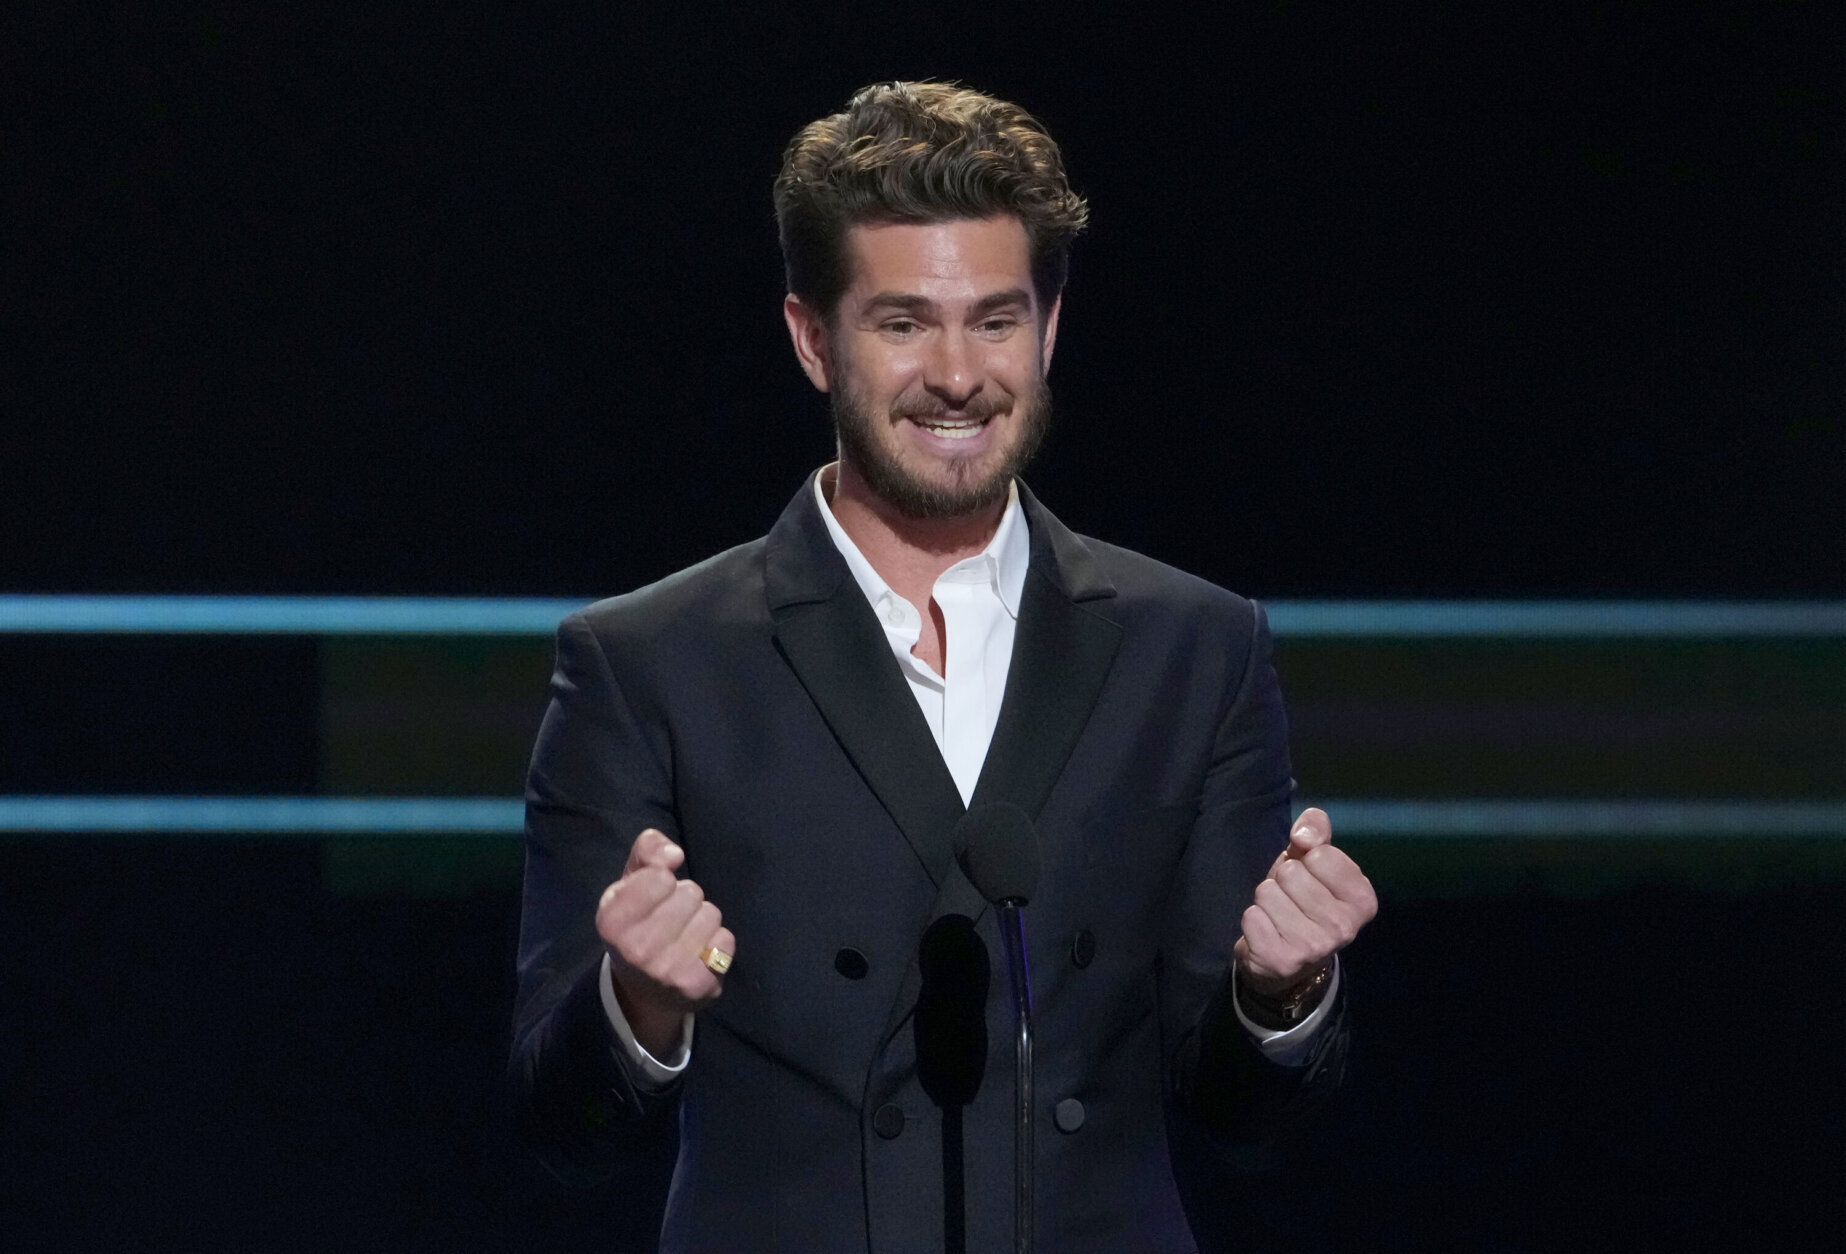 Andrew Garfield presents the life achievement award at the 29th annual Screen Actors Guild Awards on Sunday, Feb. 26, 2023, at the Fairmont Century Plaza in Los Angeles. (AP Photo/Chris Pizzello)